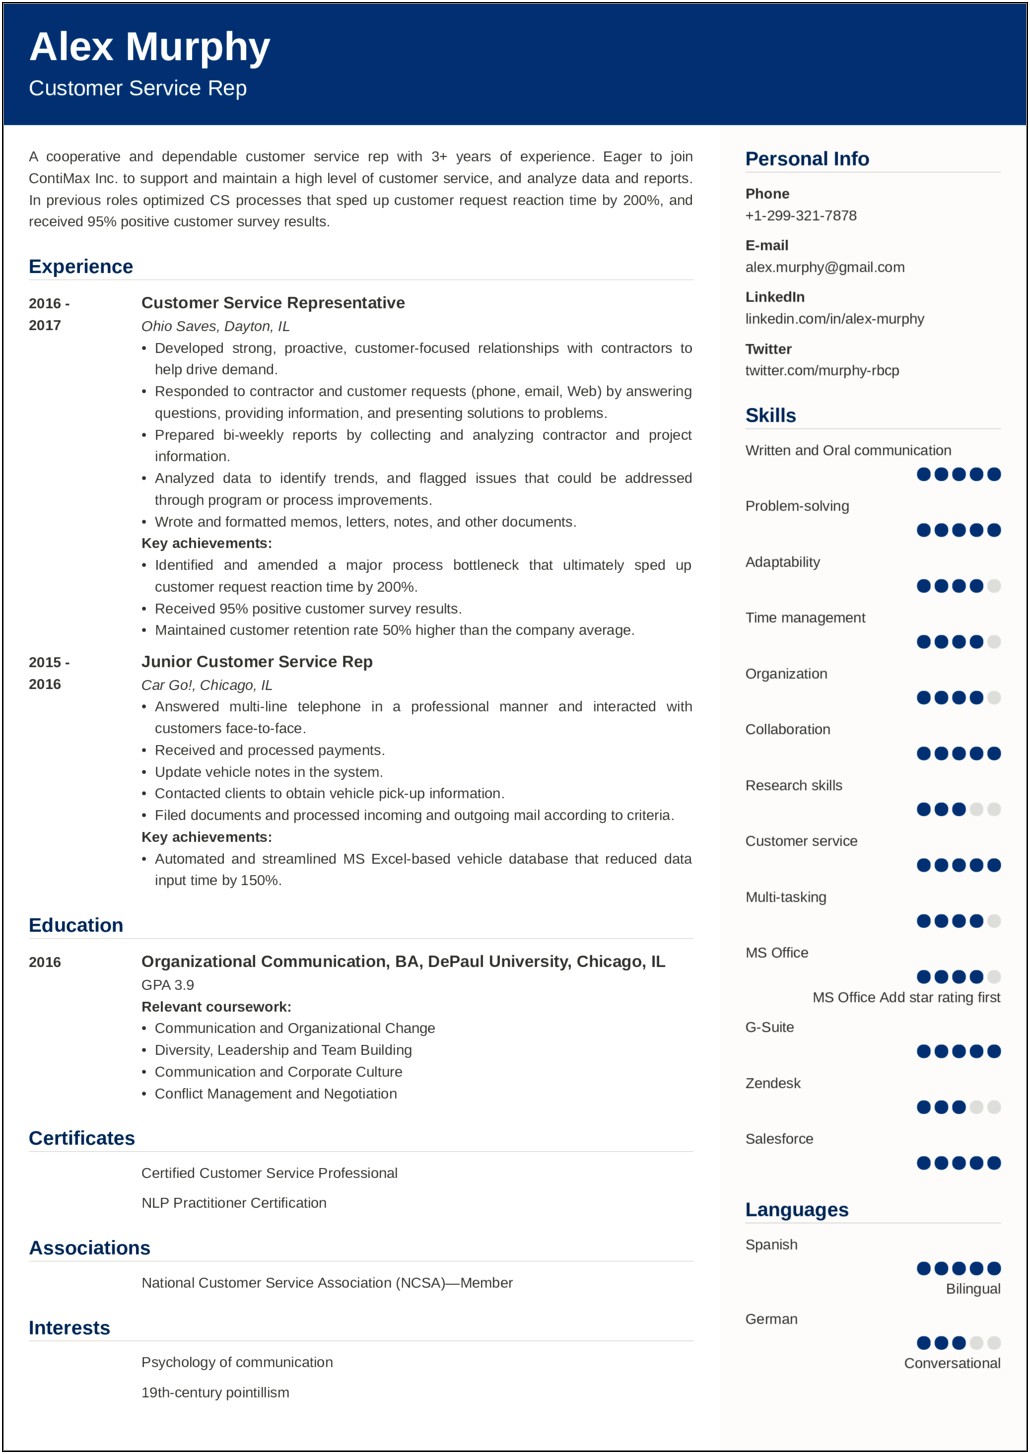 Resume And Listing Classroom Management In A Resume